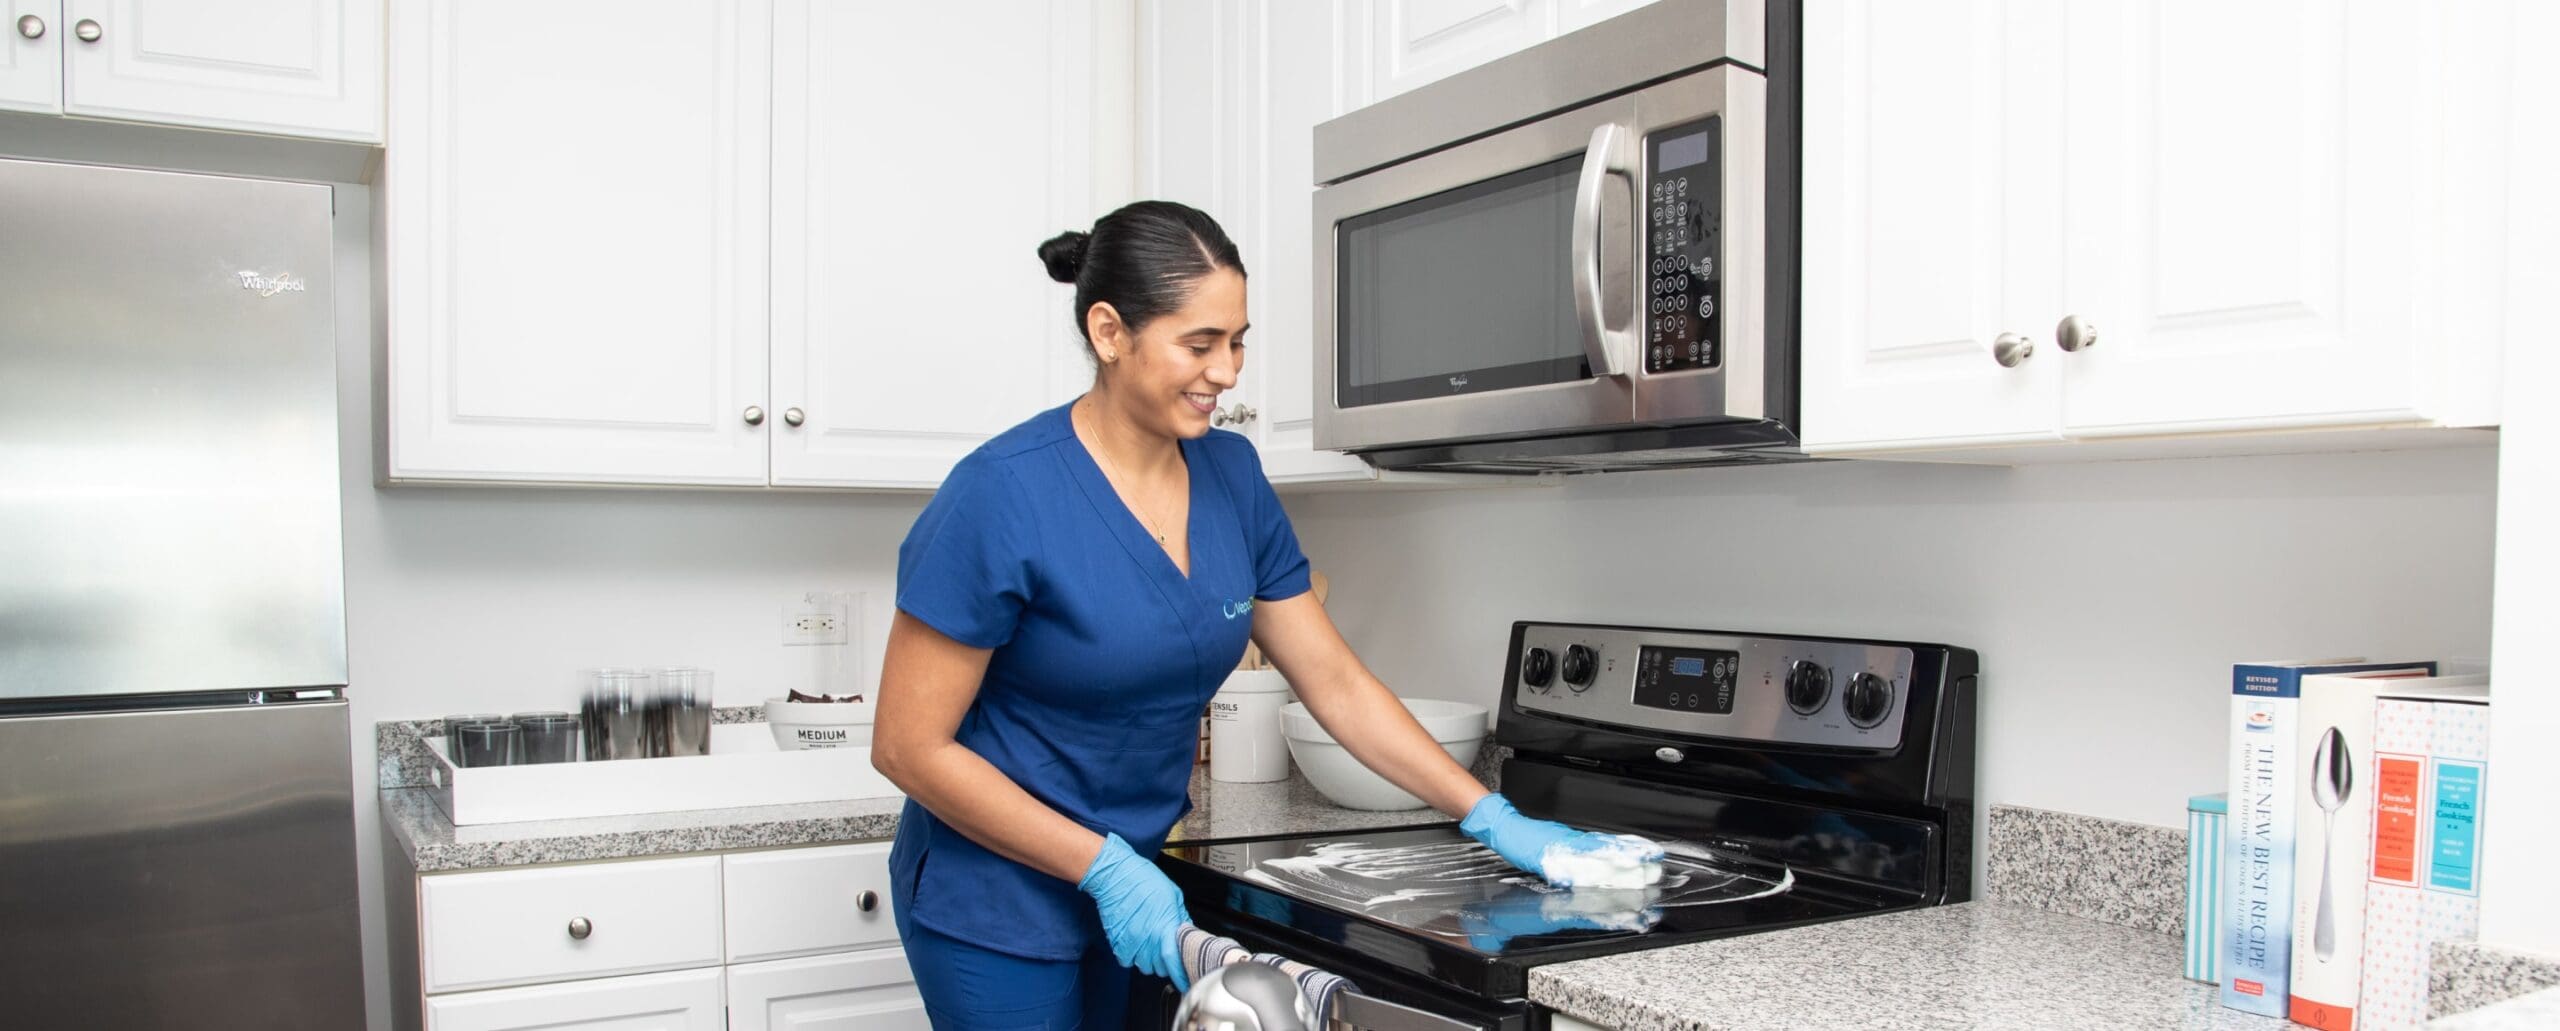 Kitchen Cleaning Service NYC, New York Kitchen Cleaners